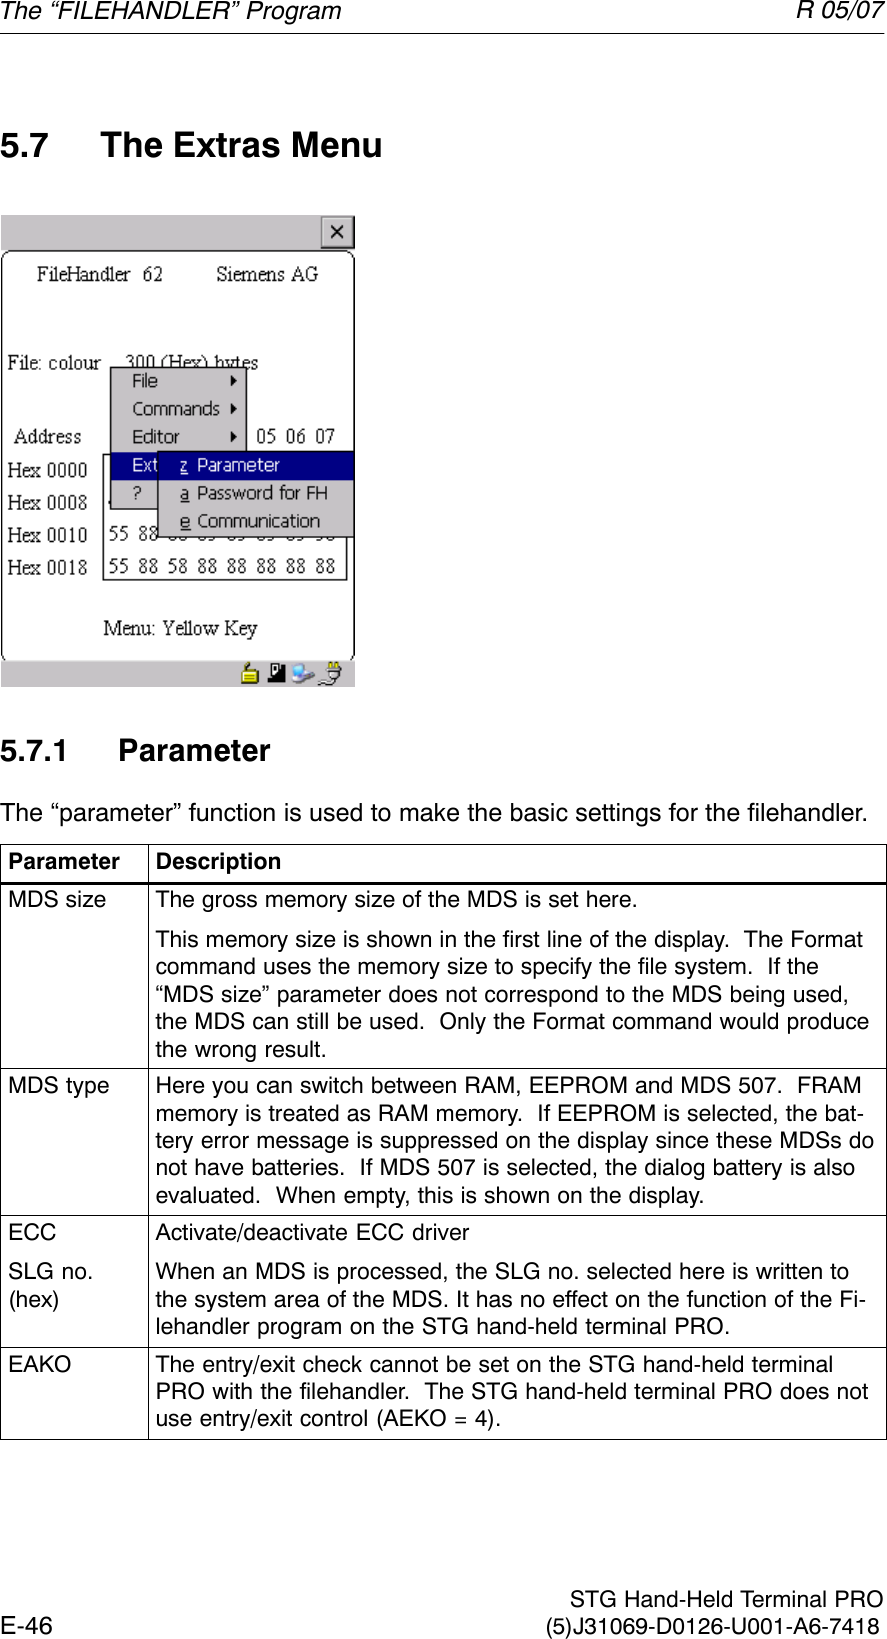 R 05/07E-46  STG Hand-Held Terminal PRO(5)J31069-D0126-U001-A6-74185.7 The Extras Menu5.7.1 ParameterThe “parameter” function is used to make the basic settings for the filehandler.Parameter DescriptionMDS size The gross memory size of the MDS is set here.This memory size is shown in the first line of the display.  The Formatcommand uses the memory size to specify the file system.  If the“MDS size” parameter does not correspond to the MDS being used,the MDS can still be used.  Only the Format command would producethe wrong result.MDS type Here you can switch between RAM, EEPROM and MDS 507.  FRAMmemory is treated as RAM memory.  If EEPROM is selected, the bat-tery error message is suppressed on the display since these MDSs donot have batteries.  If MDS 507 is selected, the dialog battery is alsoevaluated.  When empty, this is shown on the display.ECCSLG no.(hex)Activate/deactivate ECC driverWhen an MDS is processed, the SLG no. selected here is written tothe system area of the MDS. It has no effect on the function of the Fi-lehandler program on the STG hand-held terminal PRO.EAKO The entry/exit check cannot be set on the STG hand-held terminalPRO with the filehandler.  The STG hand-held terminal PRO does notuse entry/exit control (AEKO = 4).The “FILEHANDLER” Program